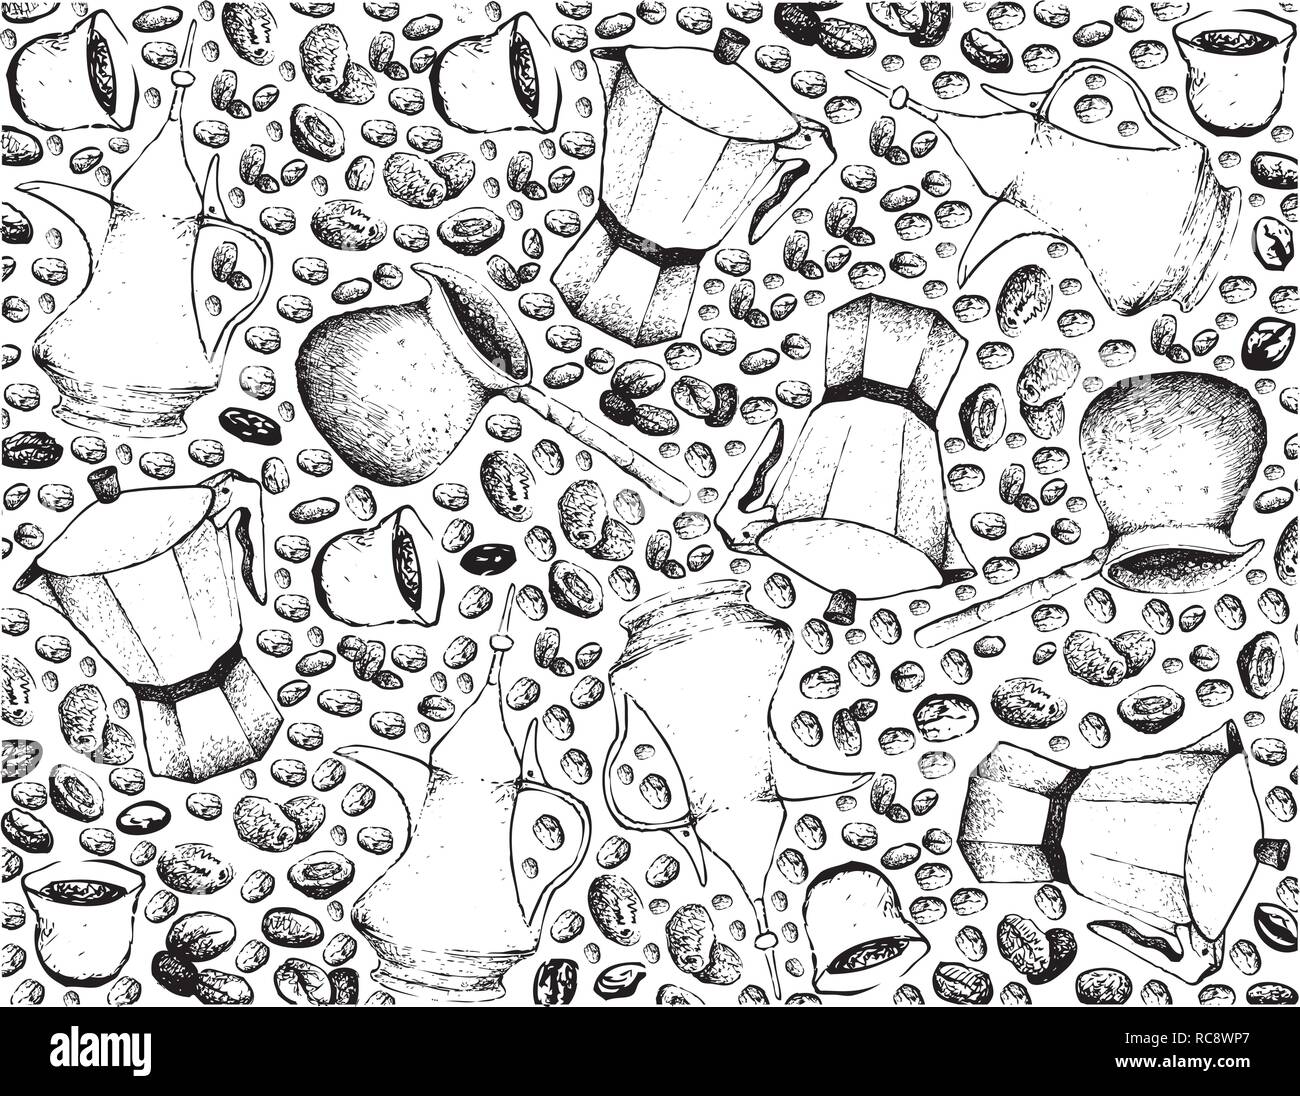 Illustration Wallpaper Background of Hand Drawn Sketch of Coffee Beans with Moka Pot, Cezve or Turkish Coffee Pot and Dallah. A Traditional Coffeemake Stock Vector